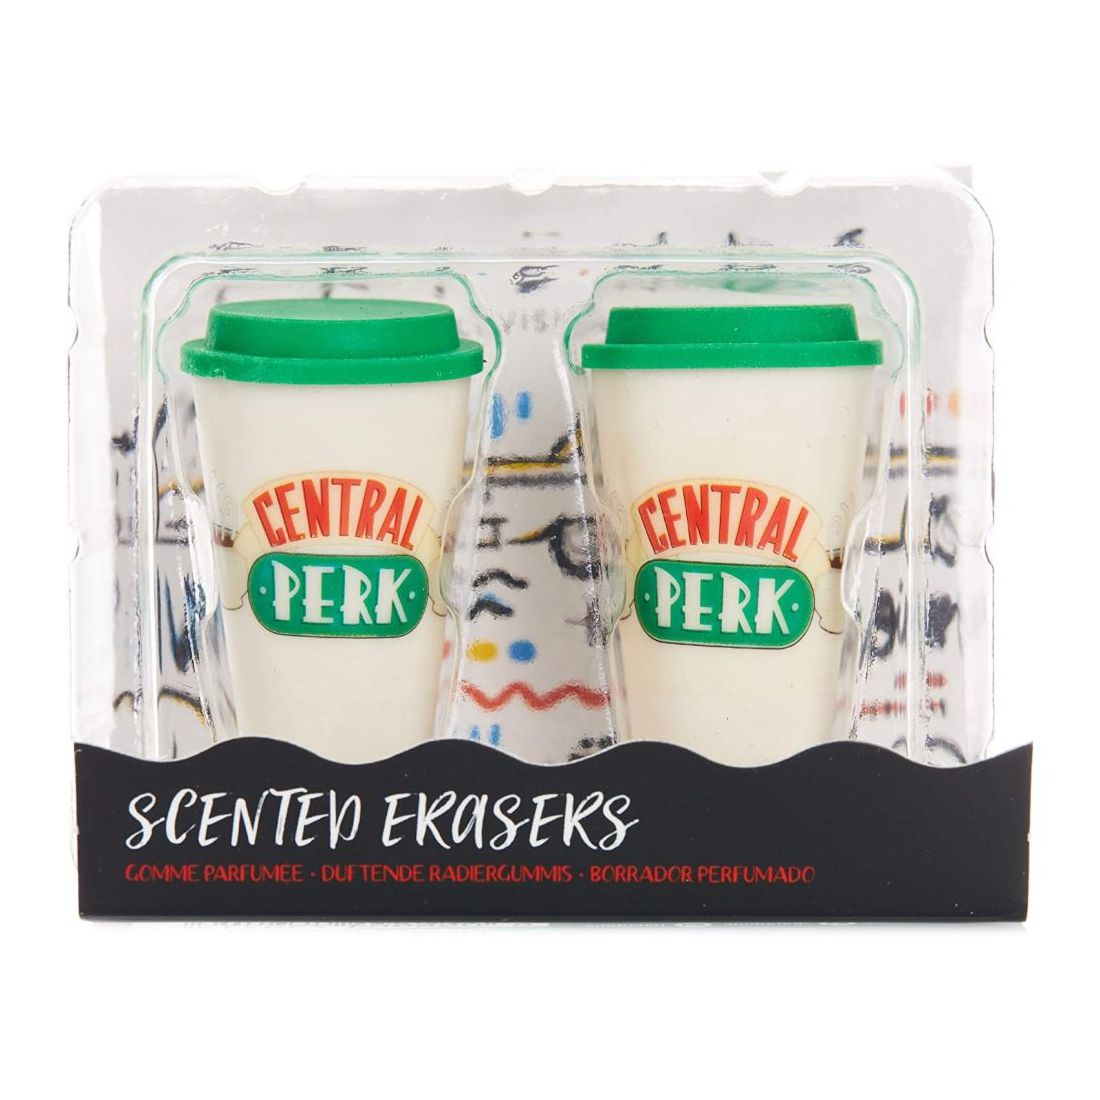 Paladone Set Of 2 Central Perk Coffee Scented Erasers